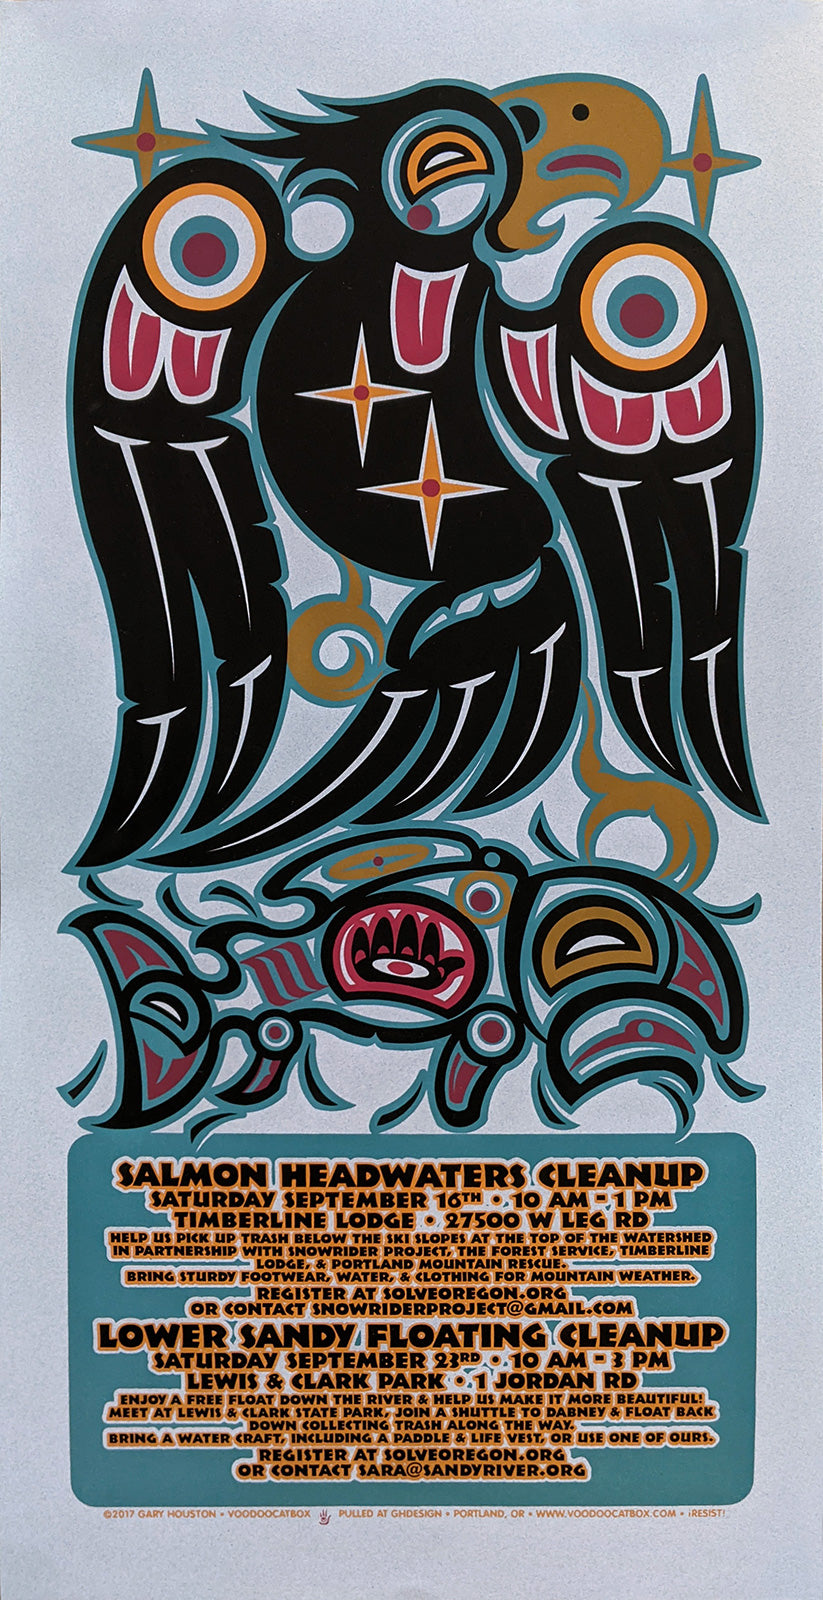 Salmon Headwaters Cleanup 2017